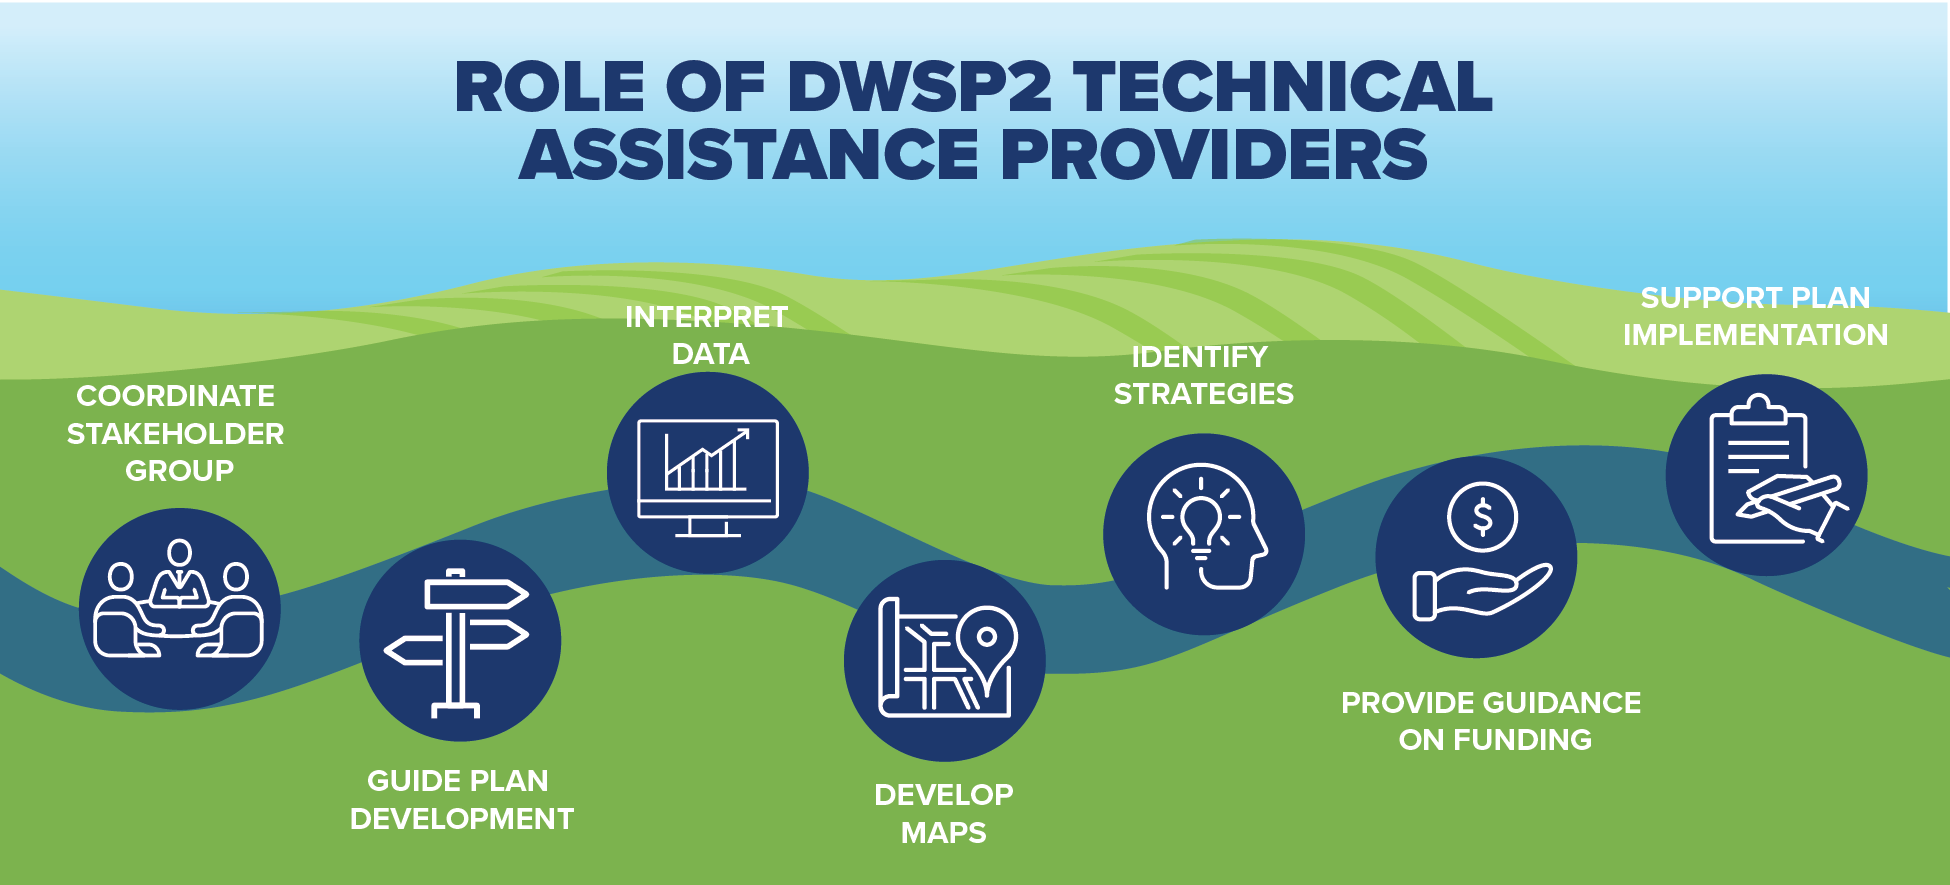 Role of DWSP2 Technical Assistance Provider 